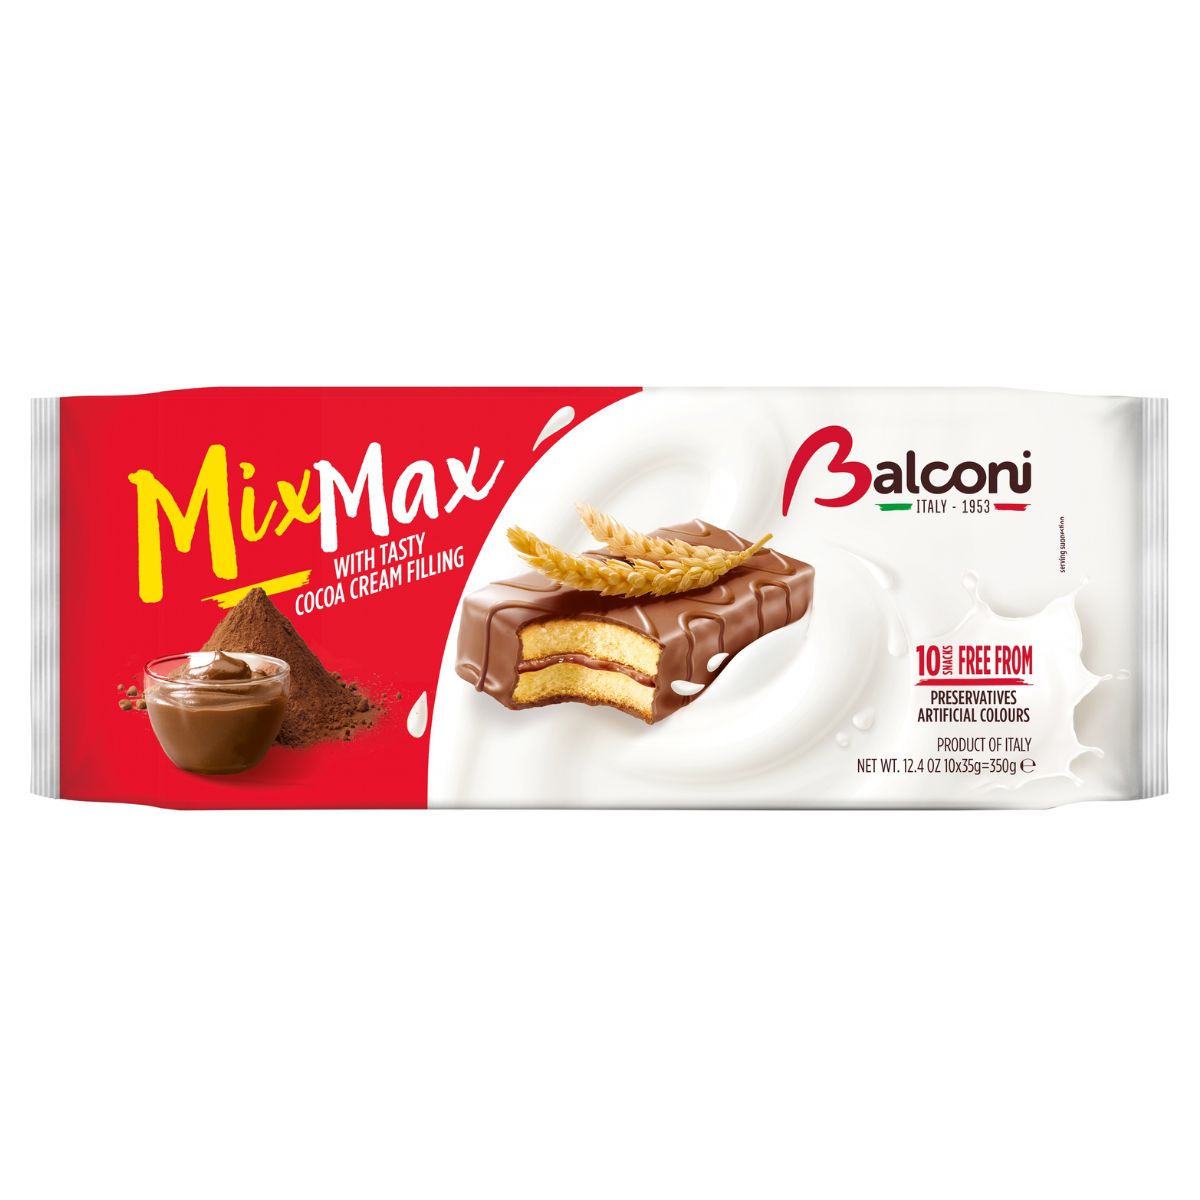 A Balconi - Mix Max Cocoa - 350g bar with milk and chocolate on it.